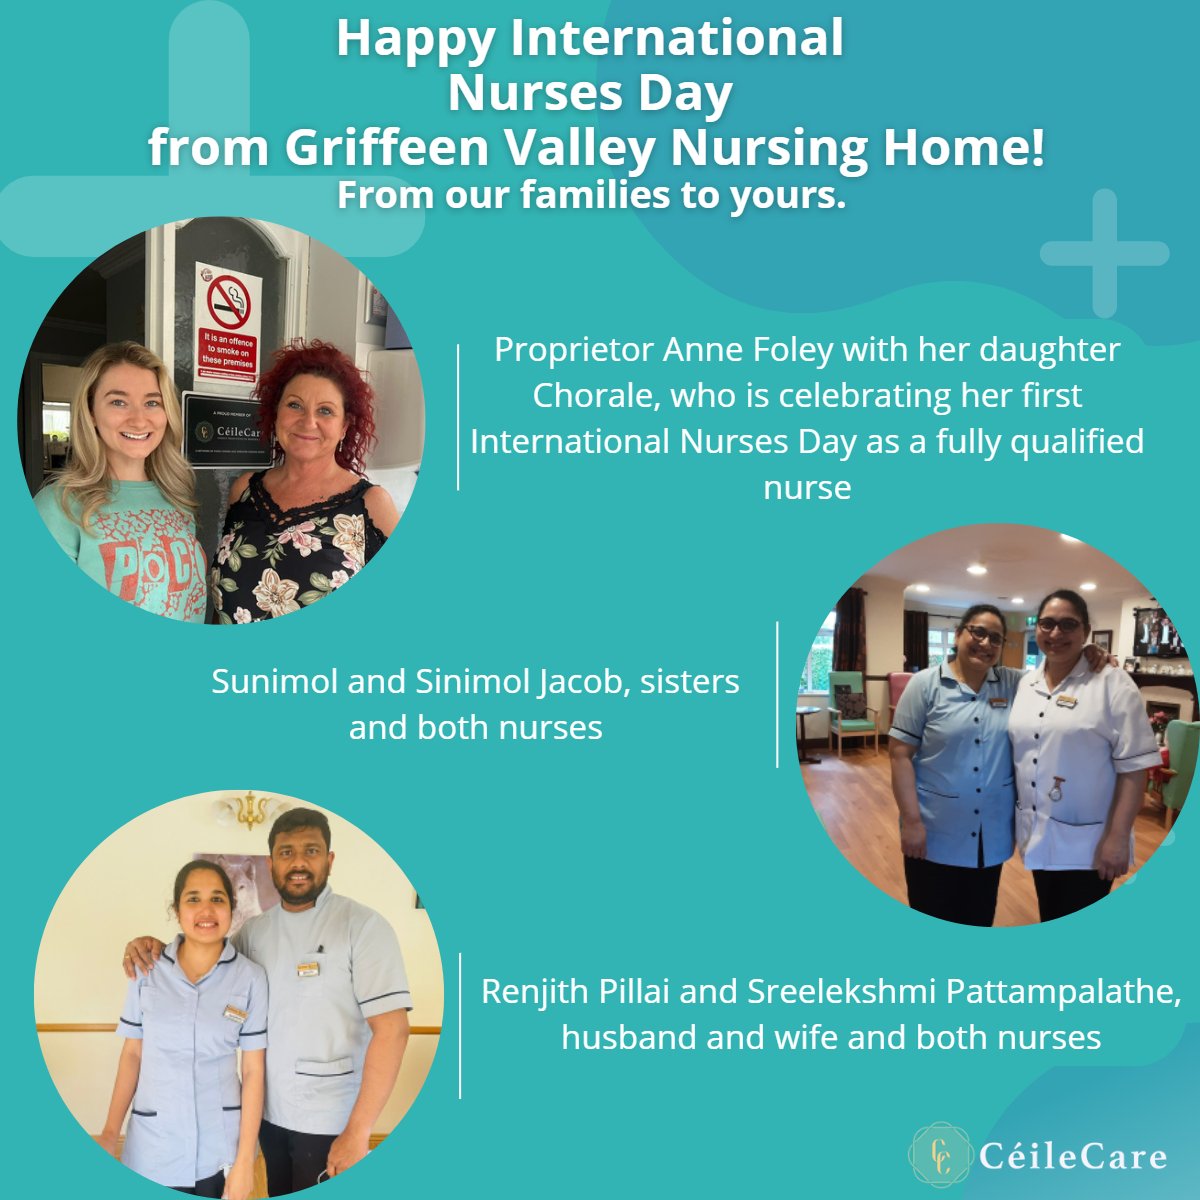 Happy International Nurses day from us all at Céile Care. Our member home Griffeen Valley Nursing Home will be proudly celebrating today as being family run and operated by excellent nursing staff! #familyownedandoperated #internationalnursesday #ceilecare #griffeenvalleynh